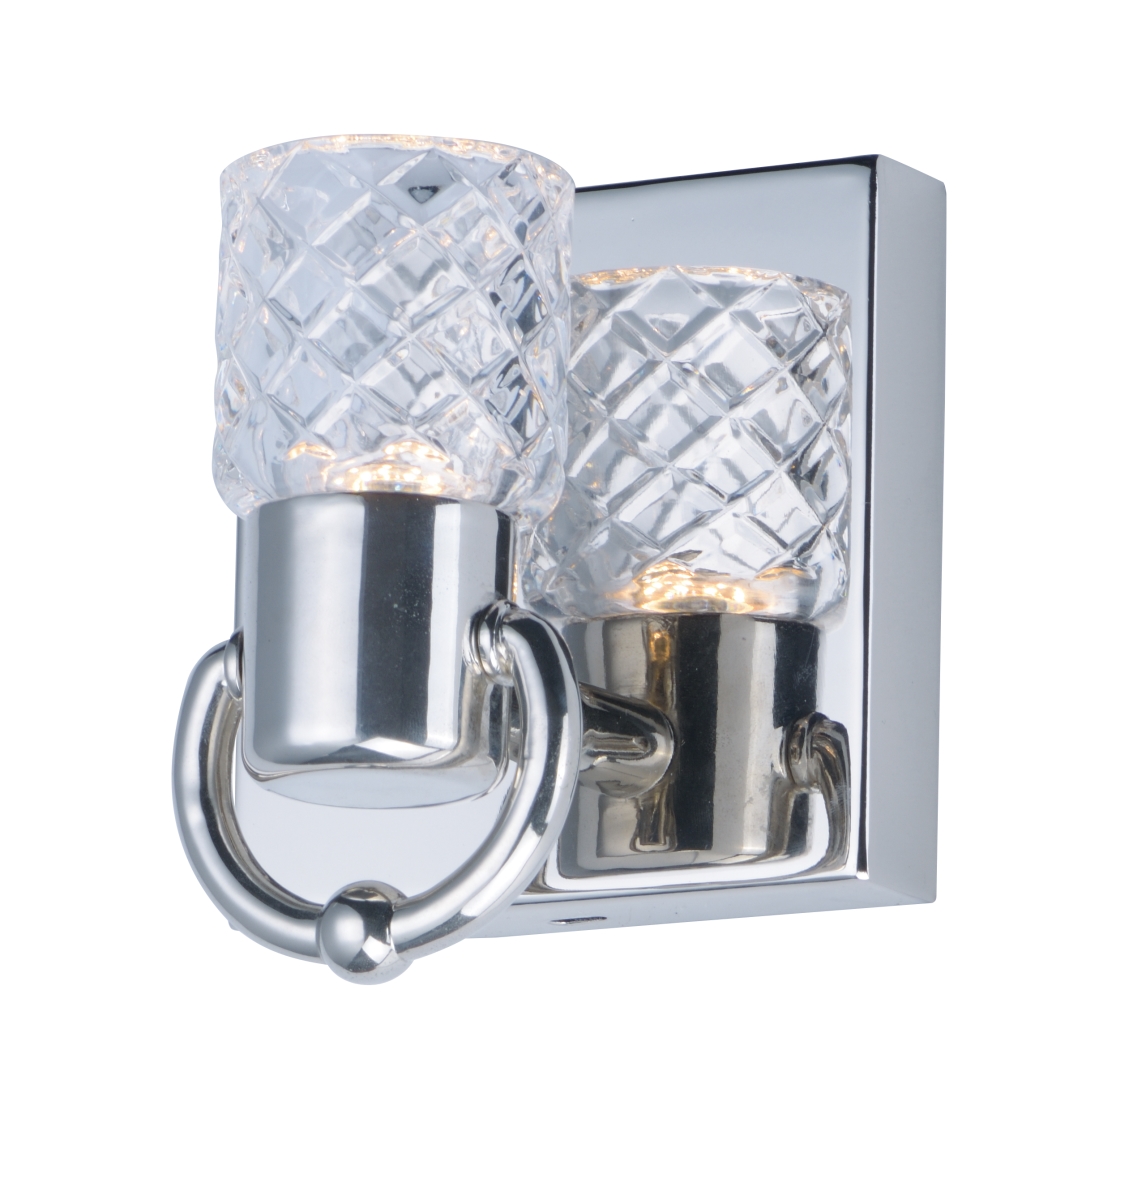 24701clpn Crystol 1-light Led Wall Sconce, Polished Nickel